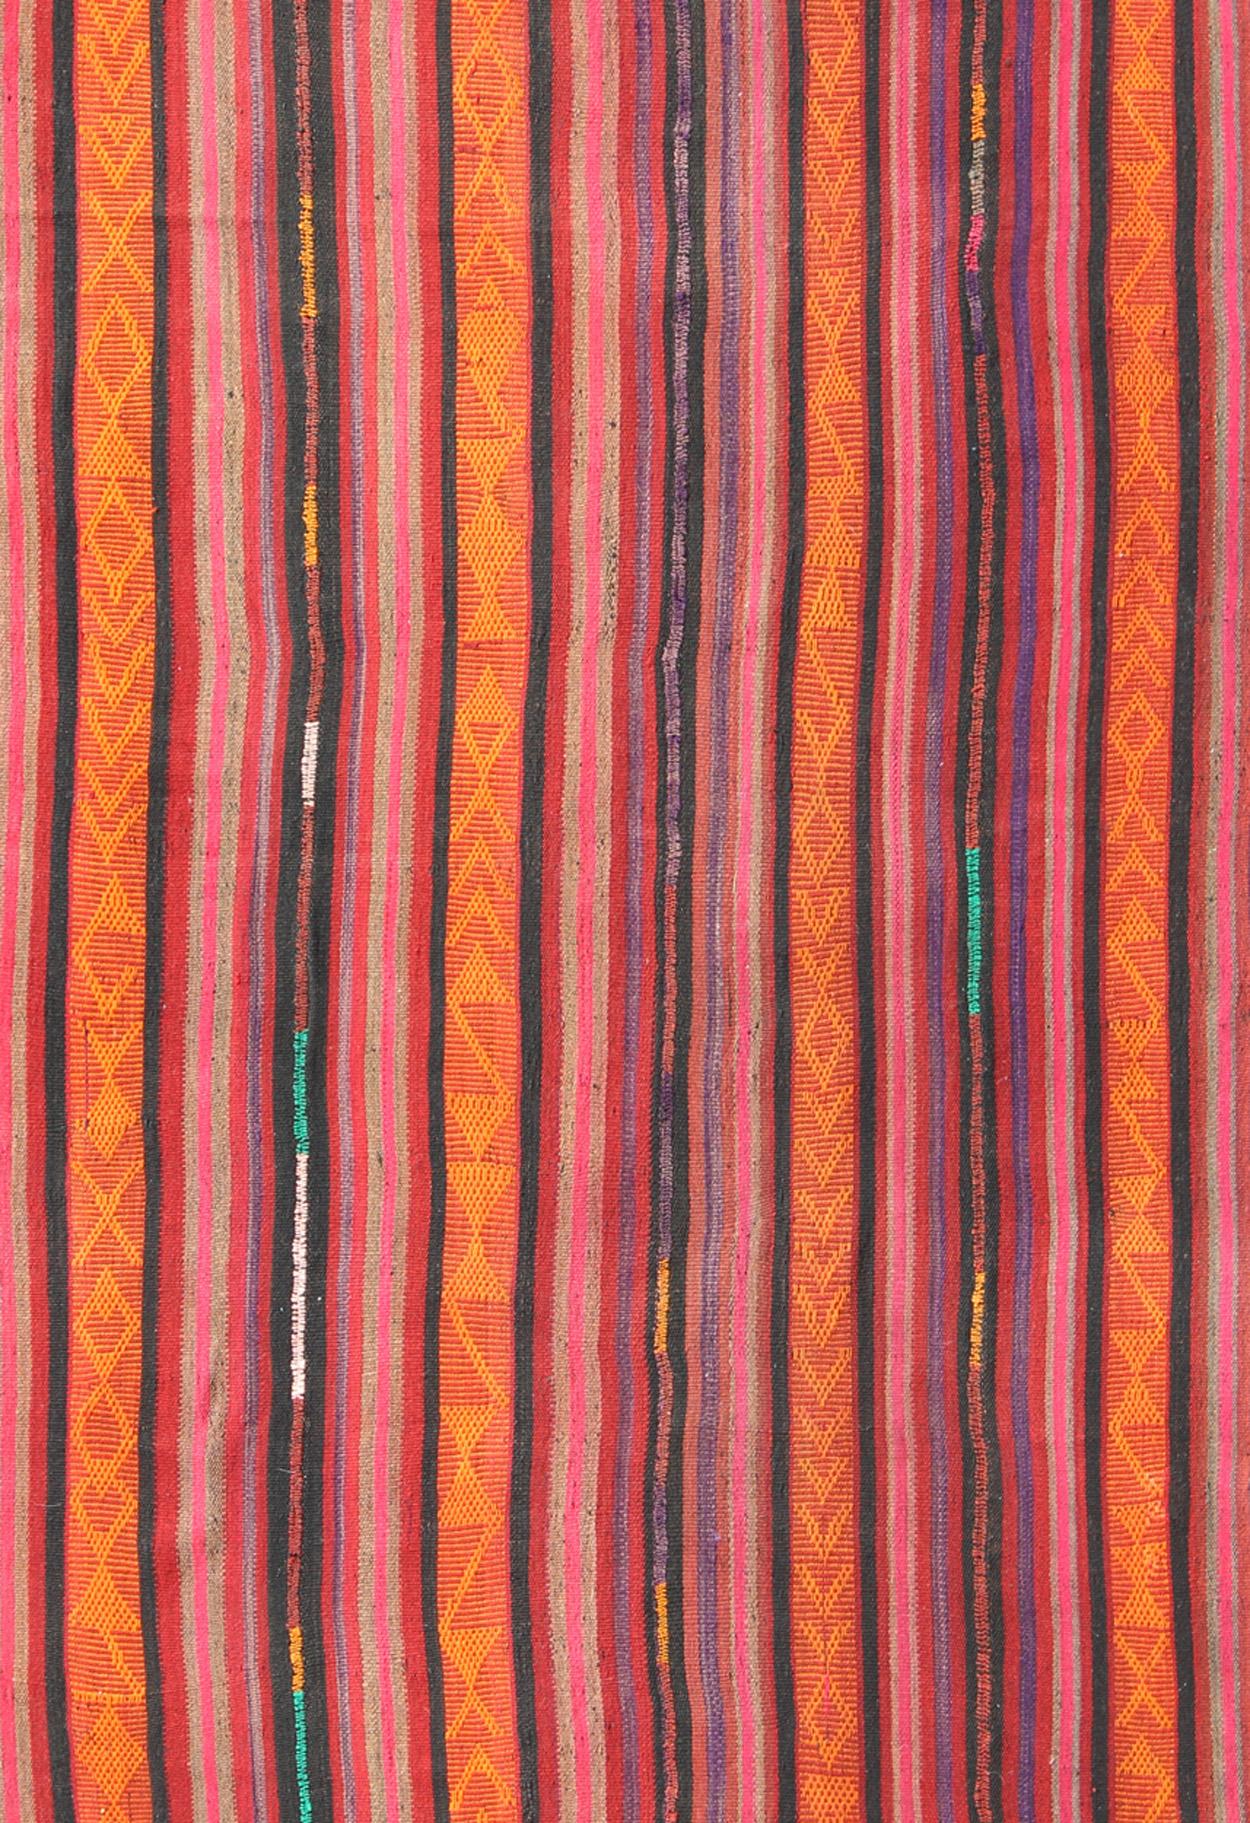 Vintage Flat-Weave Turkish Kilim in Charcoal, Orange, Purple, Red and Pink In Excellent Condition For Sale In Atlanta, GA